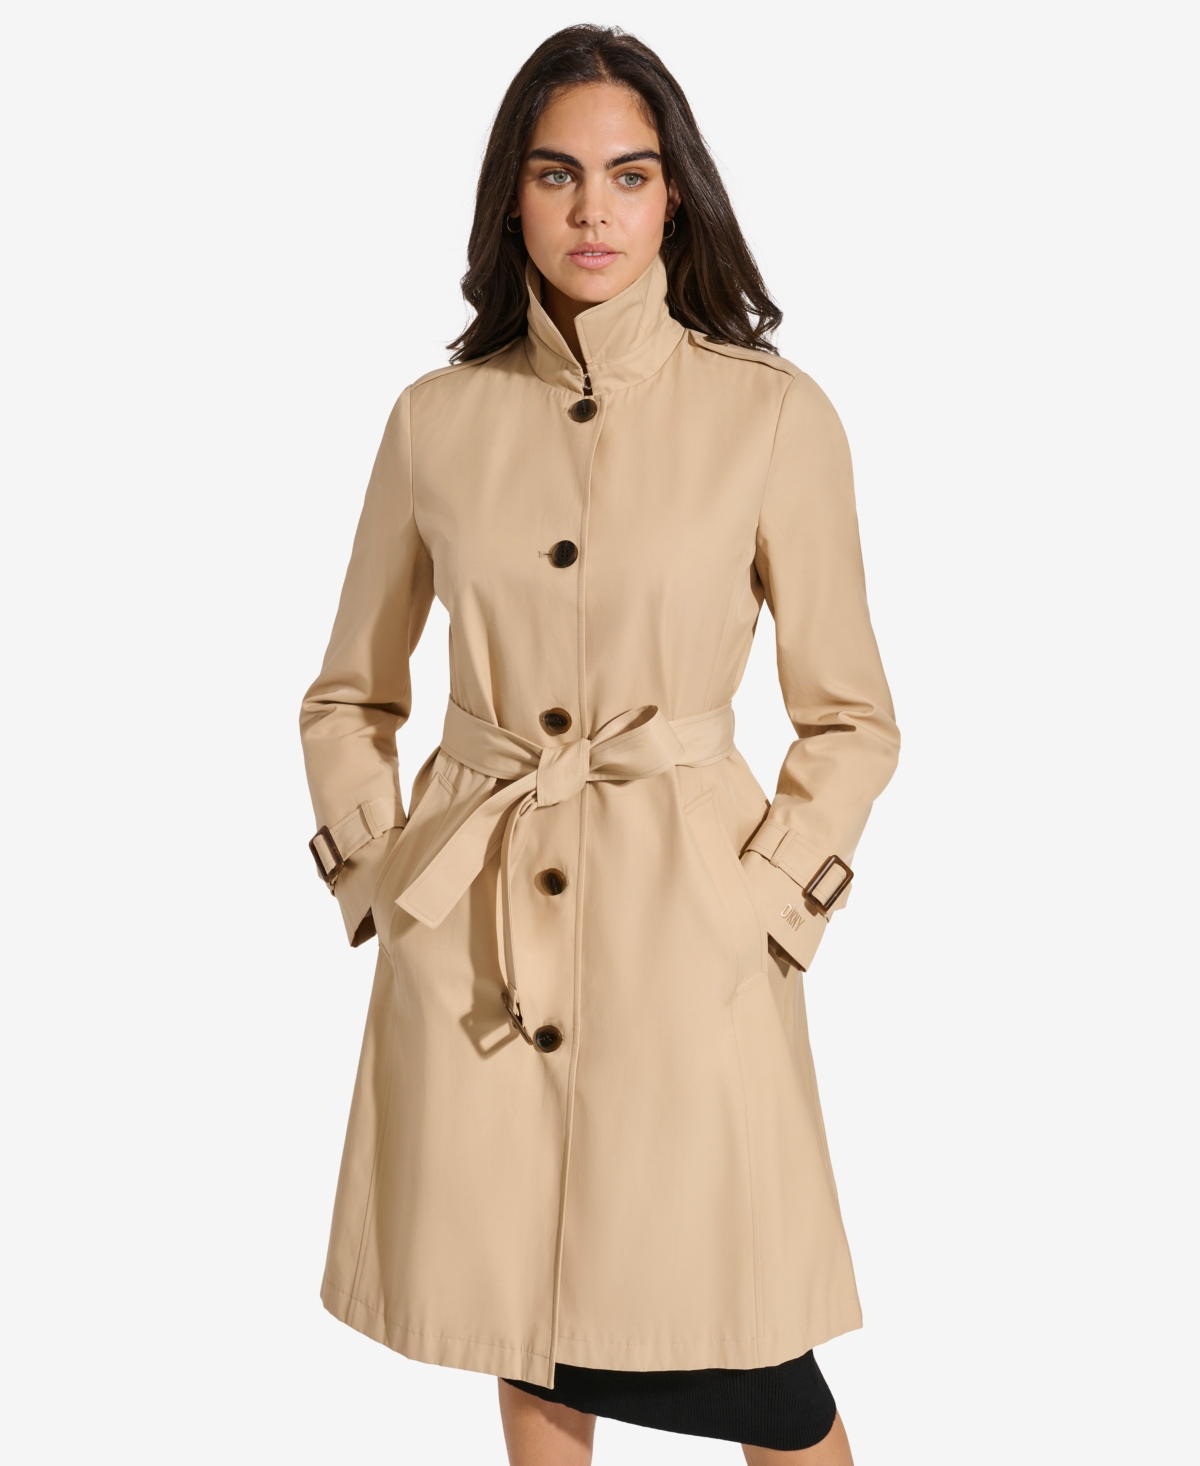 Women's Single-Breasted Pleated Trench Coat - Black